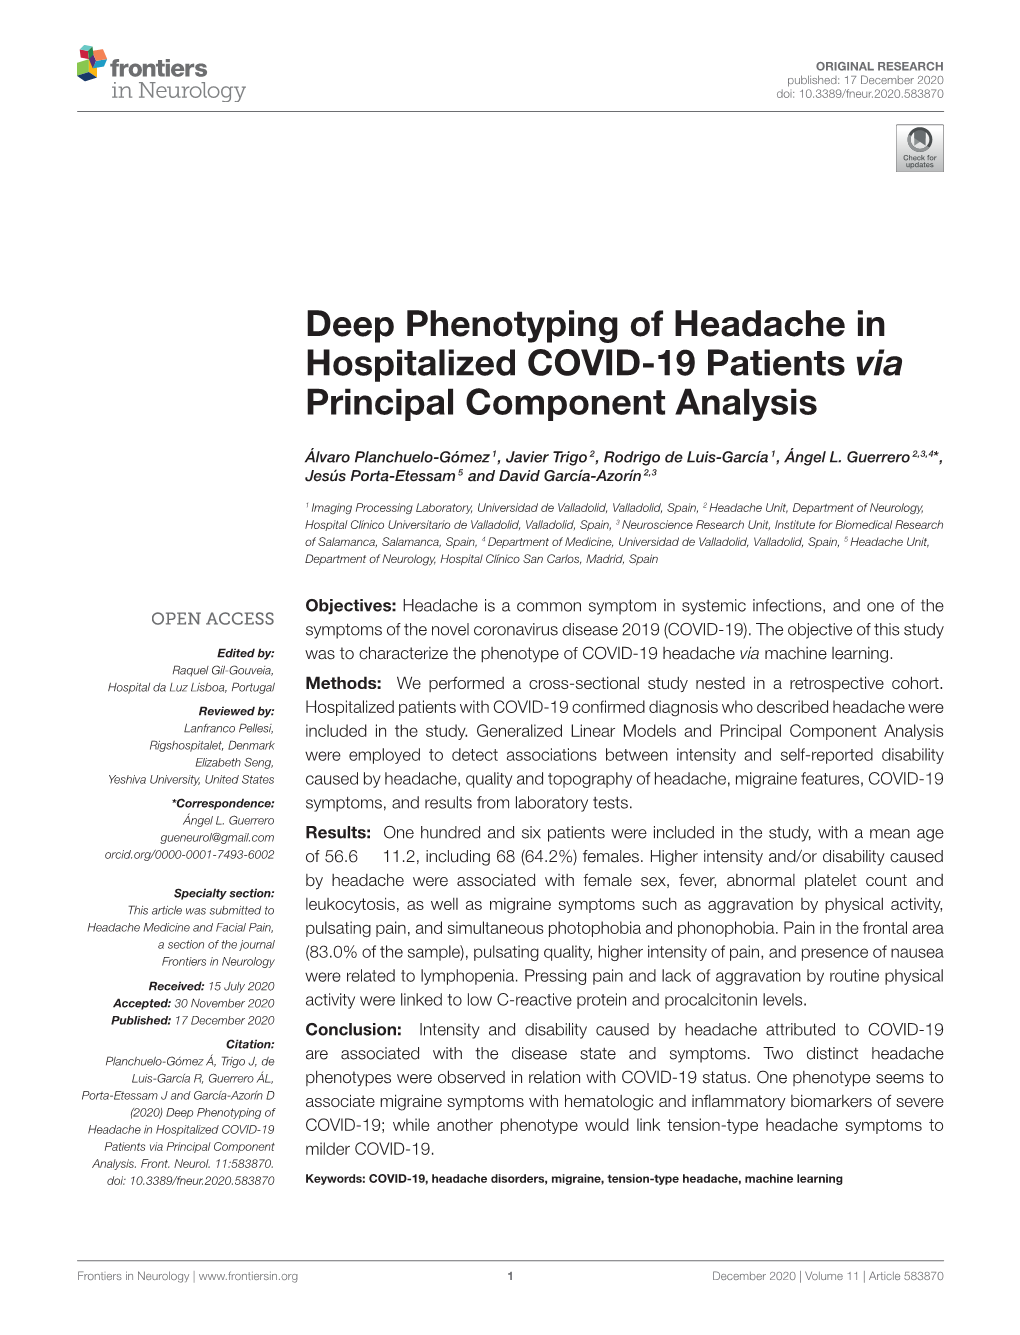 Deep Phenotyping of Headache in Hospitalized COVID-19 Patients Via Principal Component Analysis